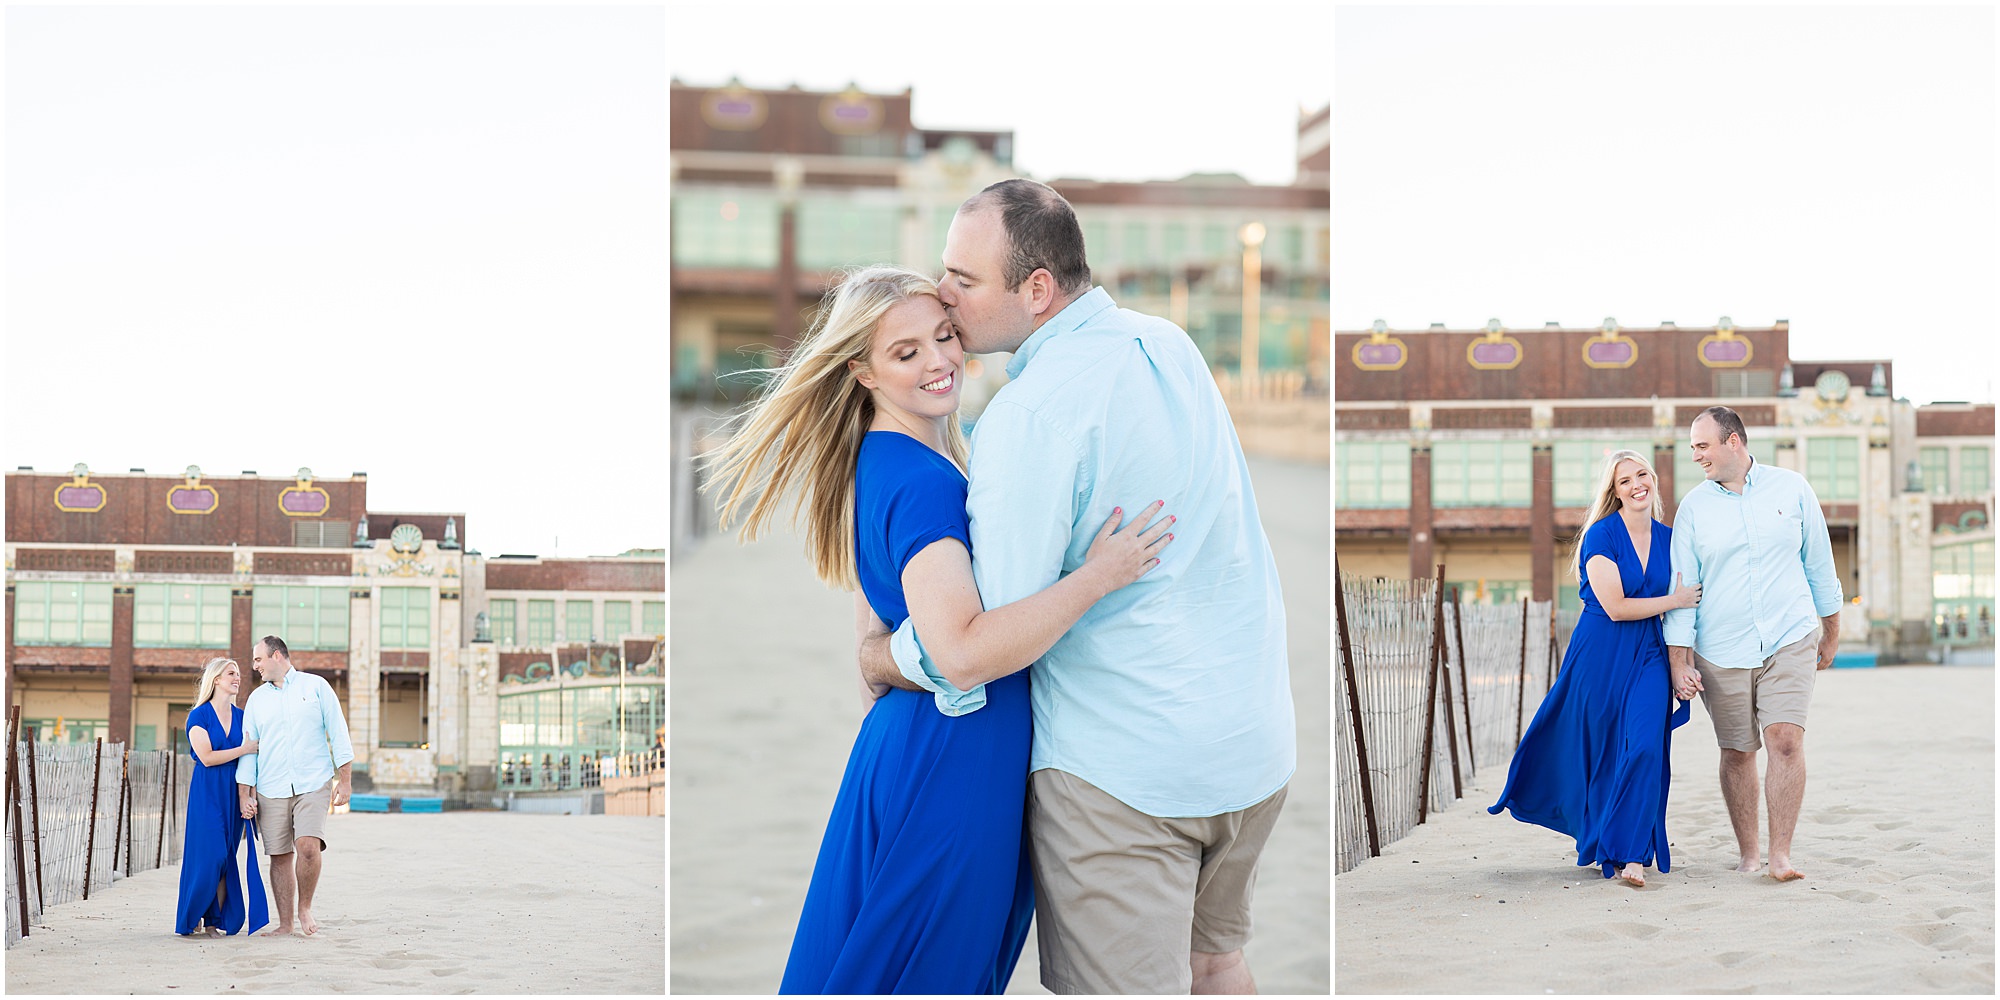 Engagement Session at Asbury Park with a couple in shades of blue.